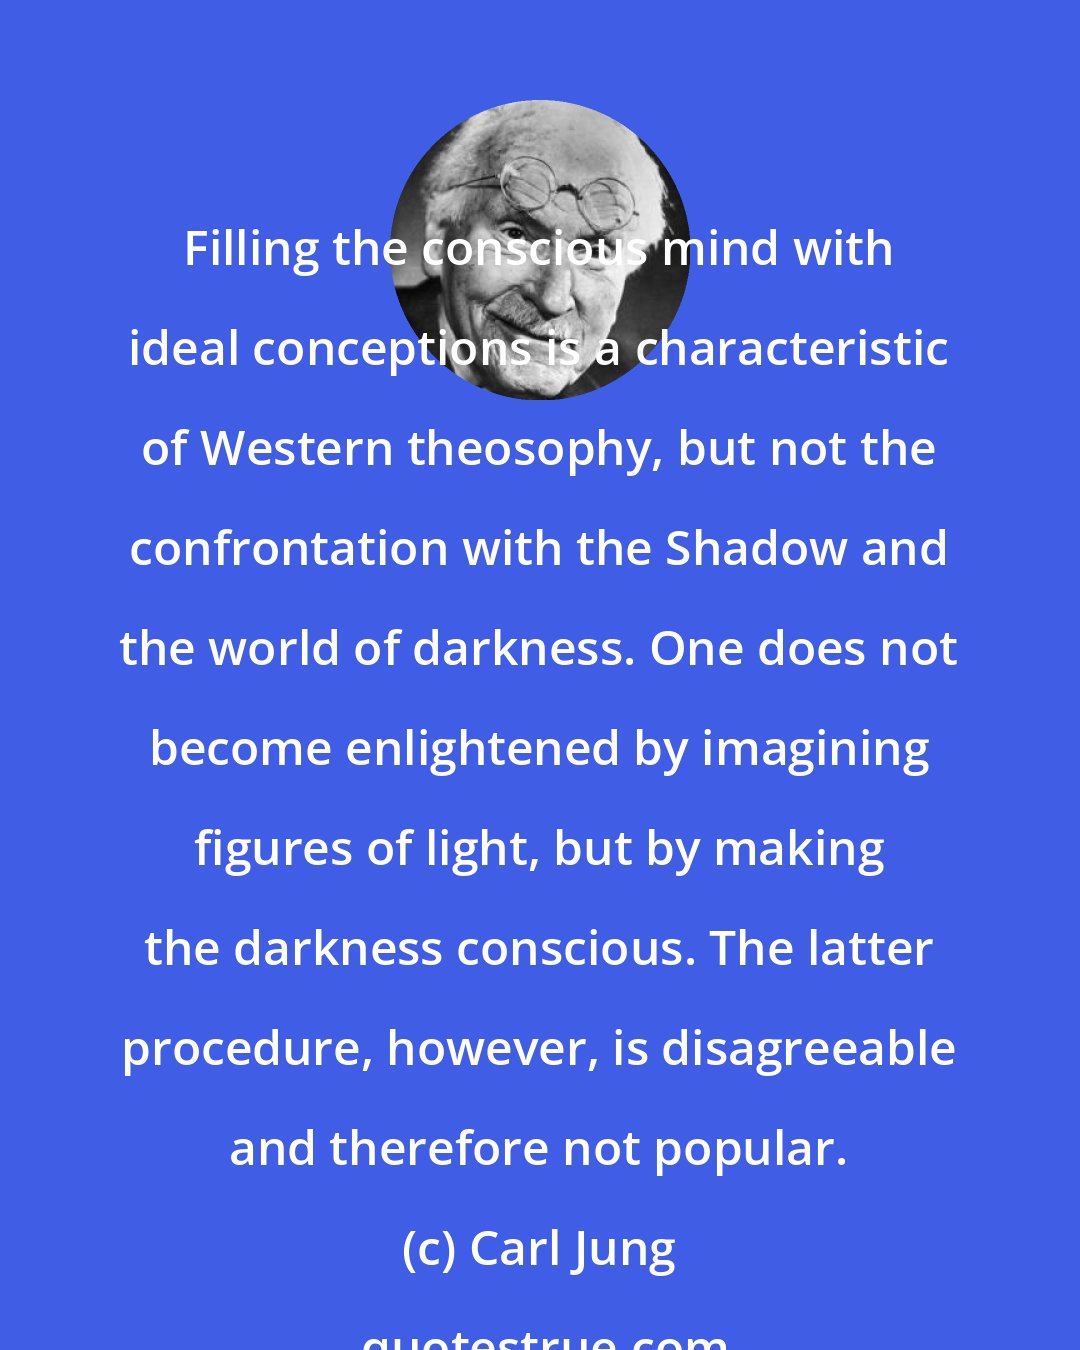 Carl Jung: Filling the conscious mind with ideal conceptions is a characteristic of Western theosophy, but not the confrontation with the Shadow and the world of darkness. One does not become enlightened by imagining figures of light, but by making the darkness conscious. The latter procedure, however, is disagreeable and therefore not popular.